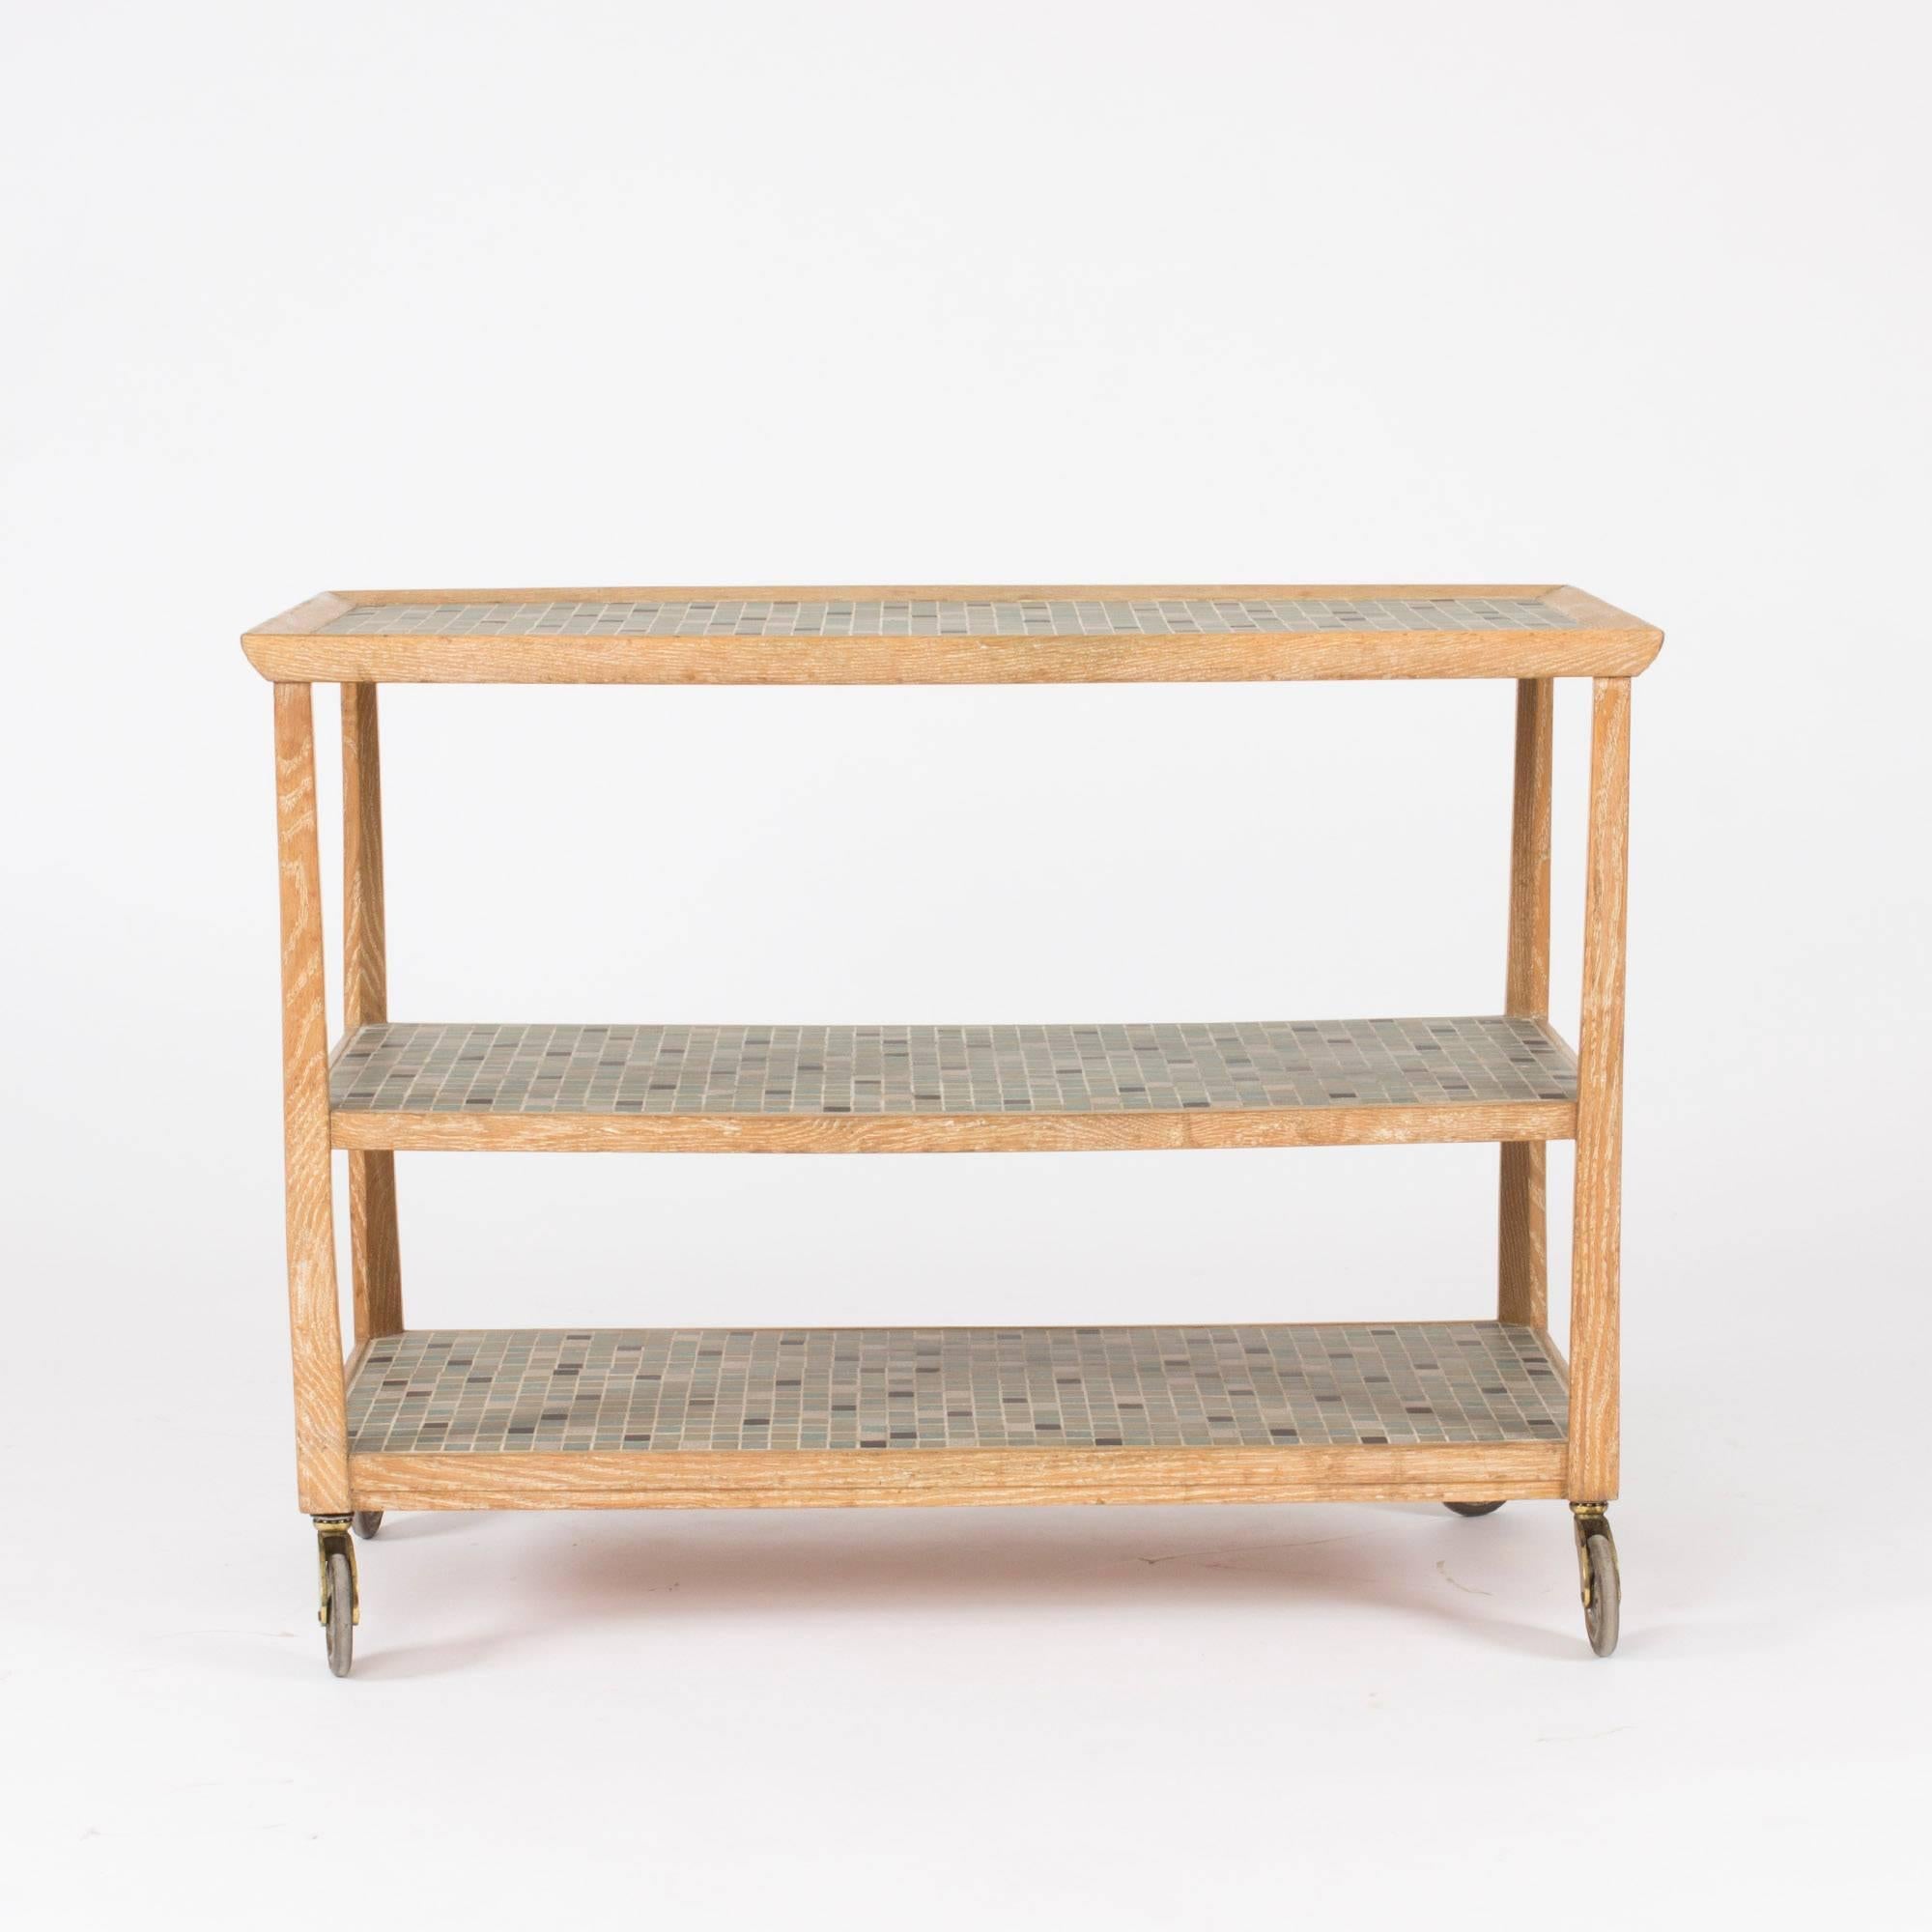 Beautiful bar trolley by Otto Schulz made from white-washed oak that brings out the wood grain in a great way. Shelves decorated with ceramic tiles in subdued greens and black. Wheels in great condition.